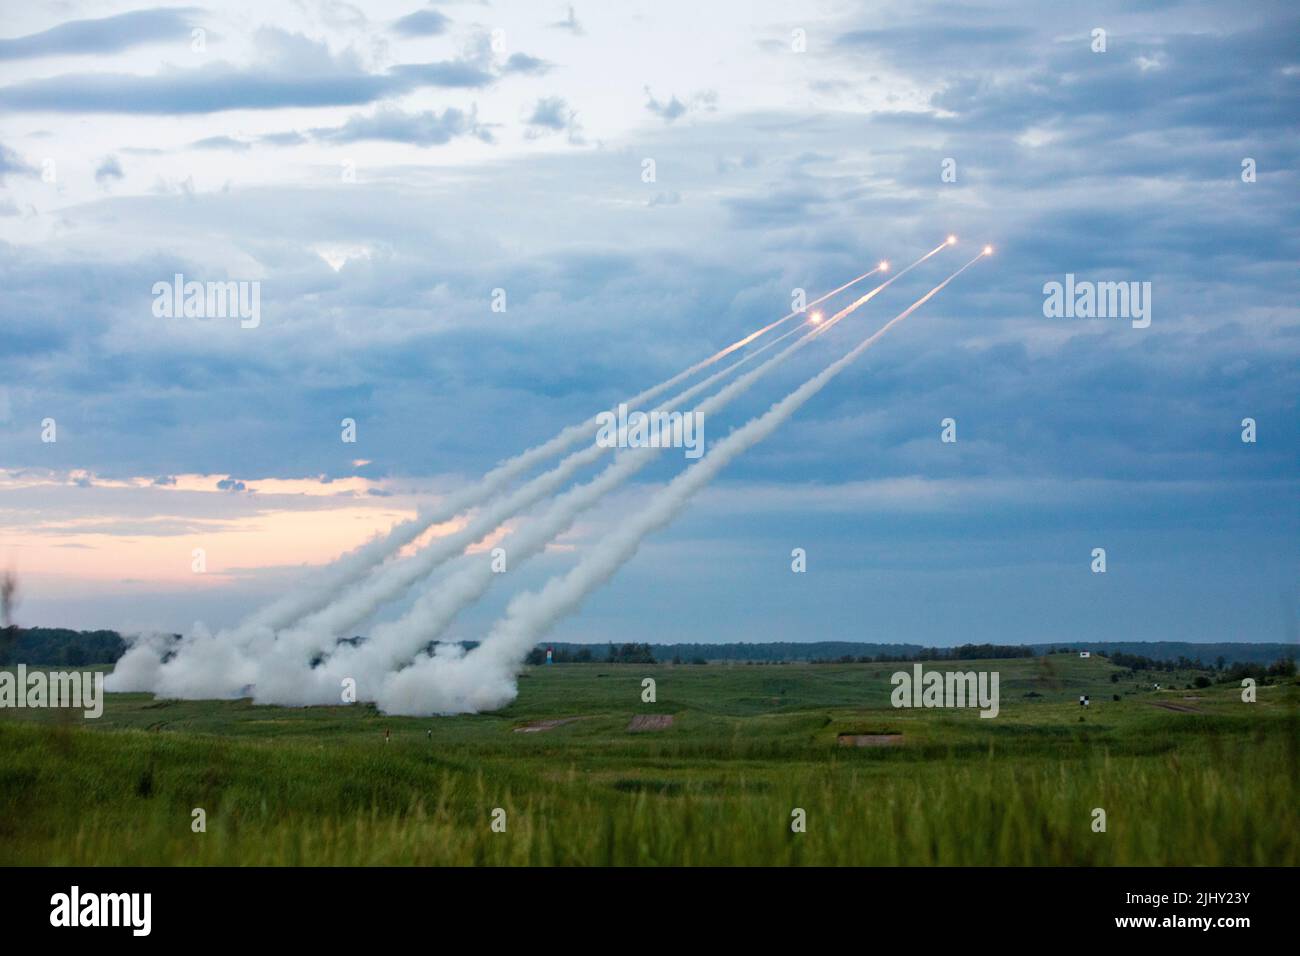 Fort Ripley, United States. 19 July, 2022. U.S. Army National Guard soldiers with the 1-147th Field Artillery Regiment, launch rockets from a M270A1 Multiple Launch Rocket System during a live-fire training exercise at Camp Ripley, July 19, 2022 in Fort Ripley, Minnesota. Credit: Spc. Elizabeth Hackbarth/US Marines Photo/Alamy Live News Stock Photo